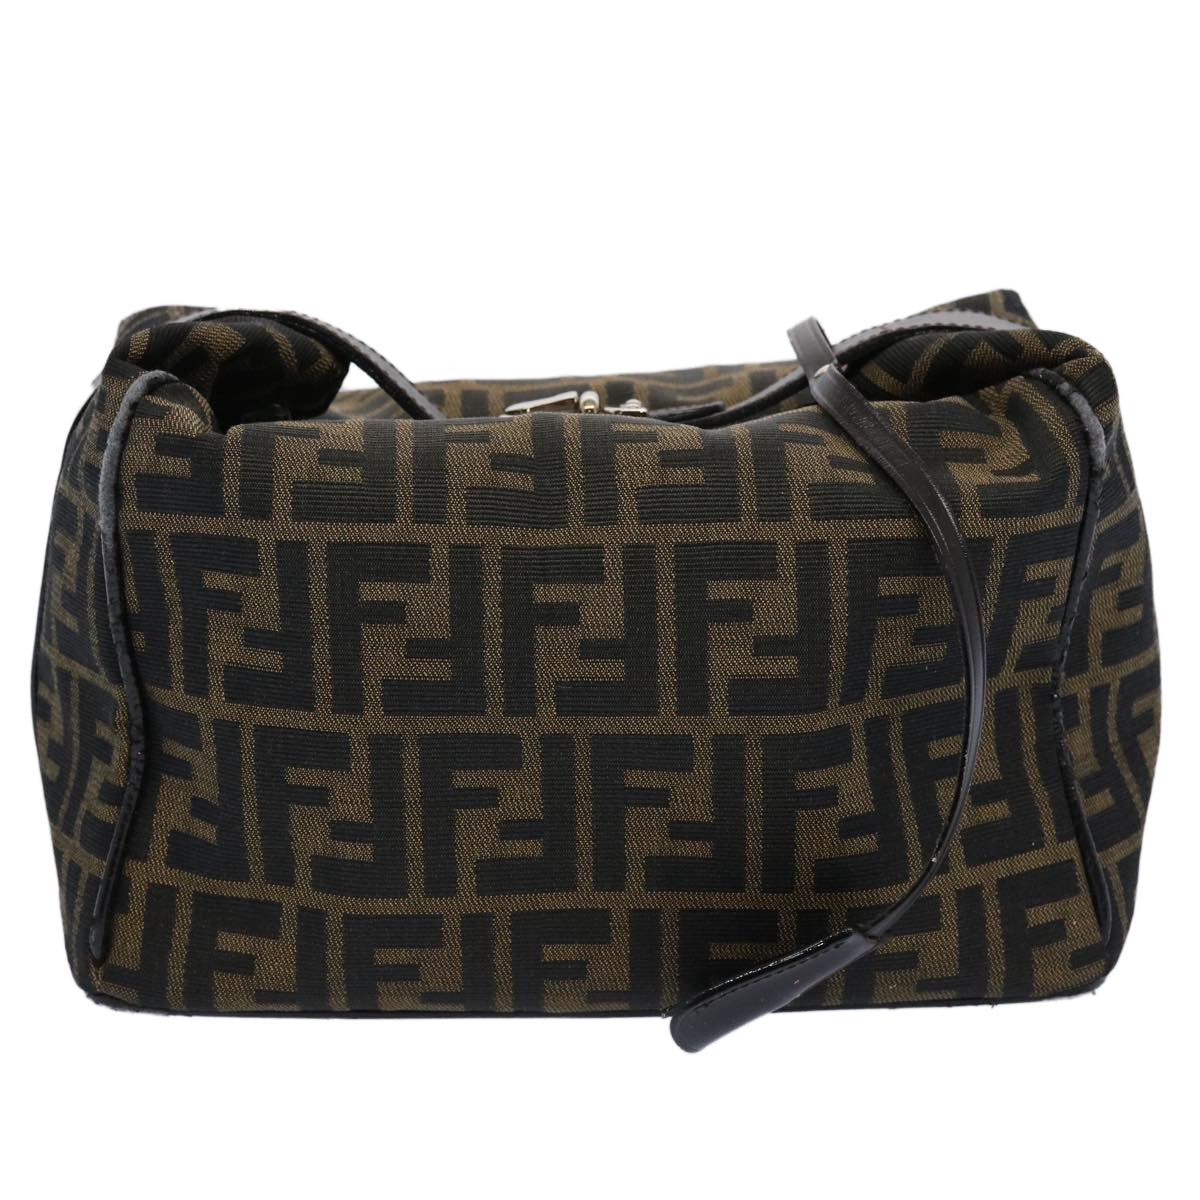 FENDI Zucca Canvas Vanity Cosmetic Pouch Black Brown Auth 61577 - 0